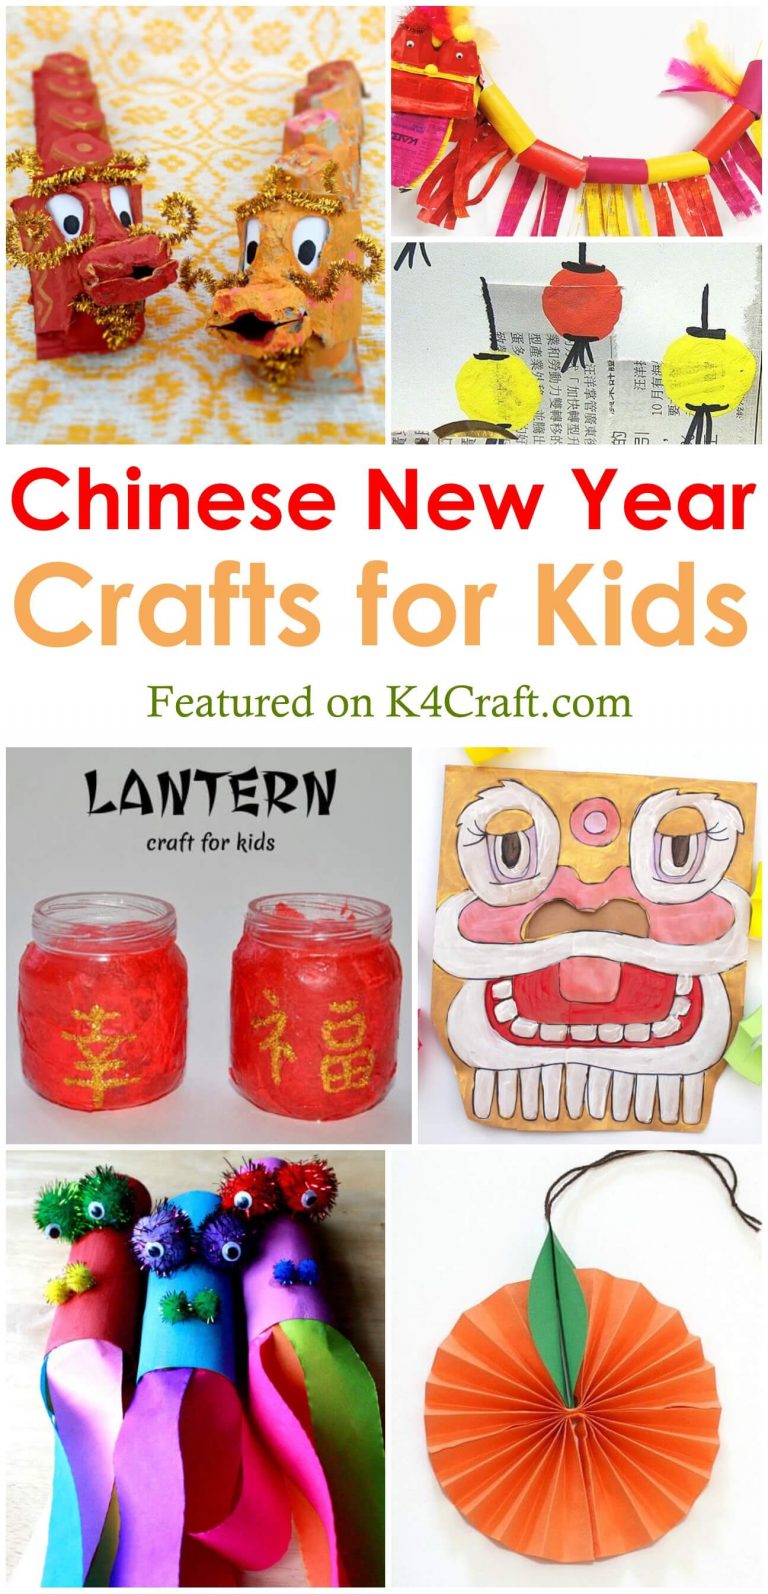 Chinese New Year Crafts & Activities for Kids - K4 Craft